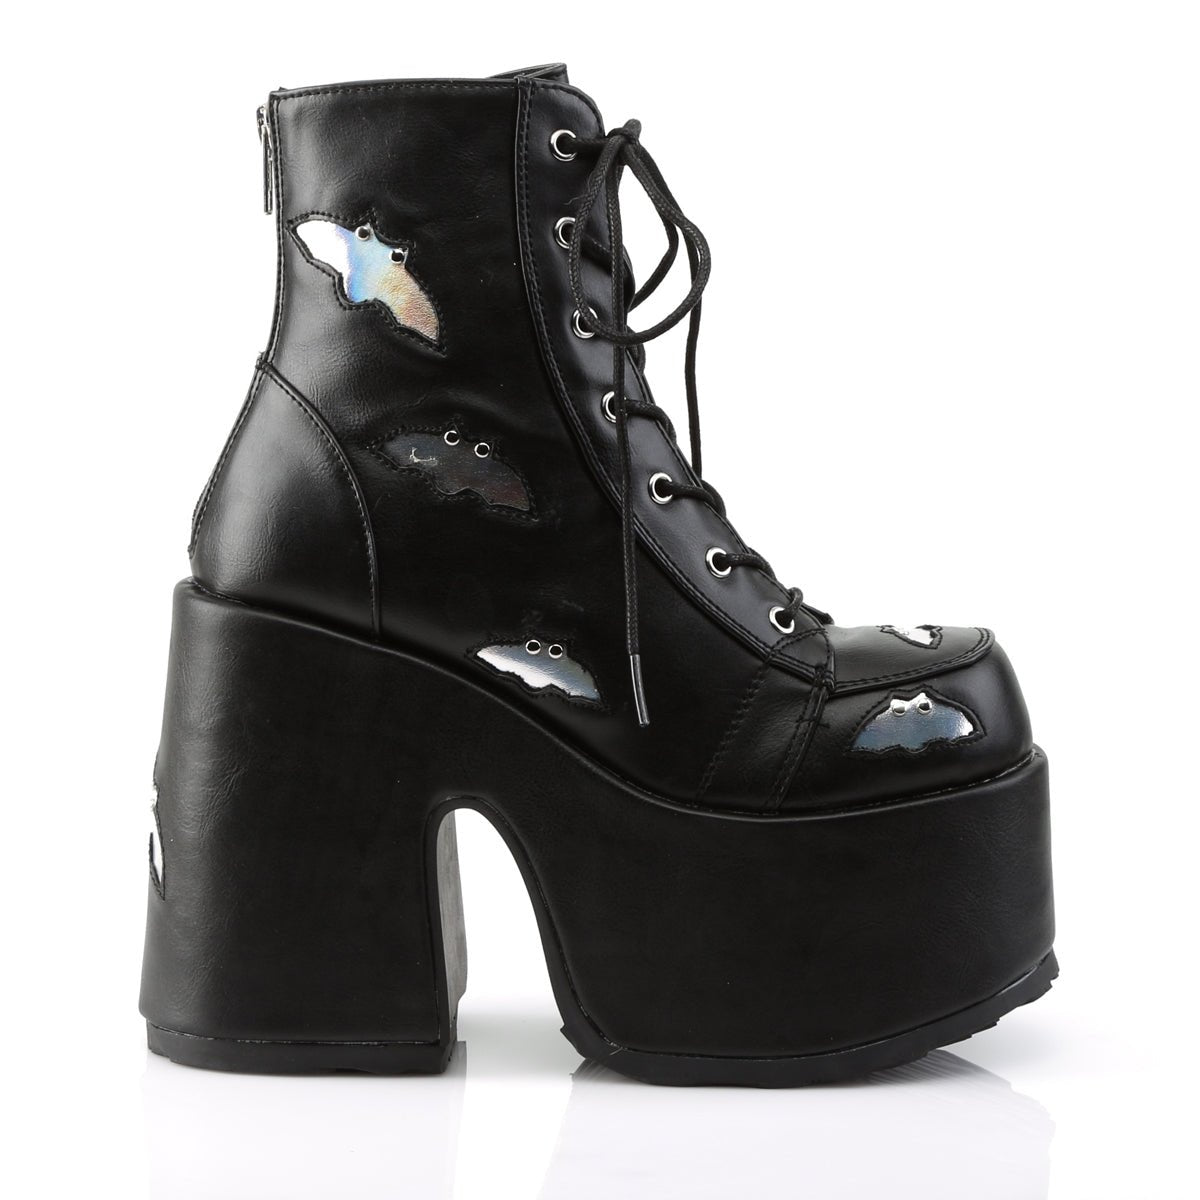 Too Fast | Demonia Camel 201 | Black & Silver Holographic Vegan Leather Women's Ankle Boots